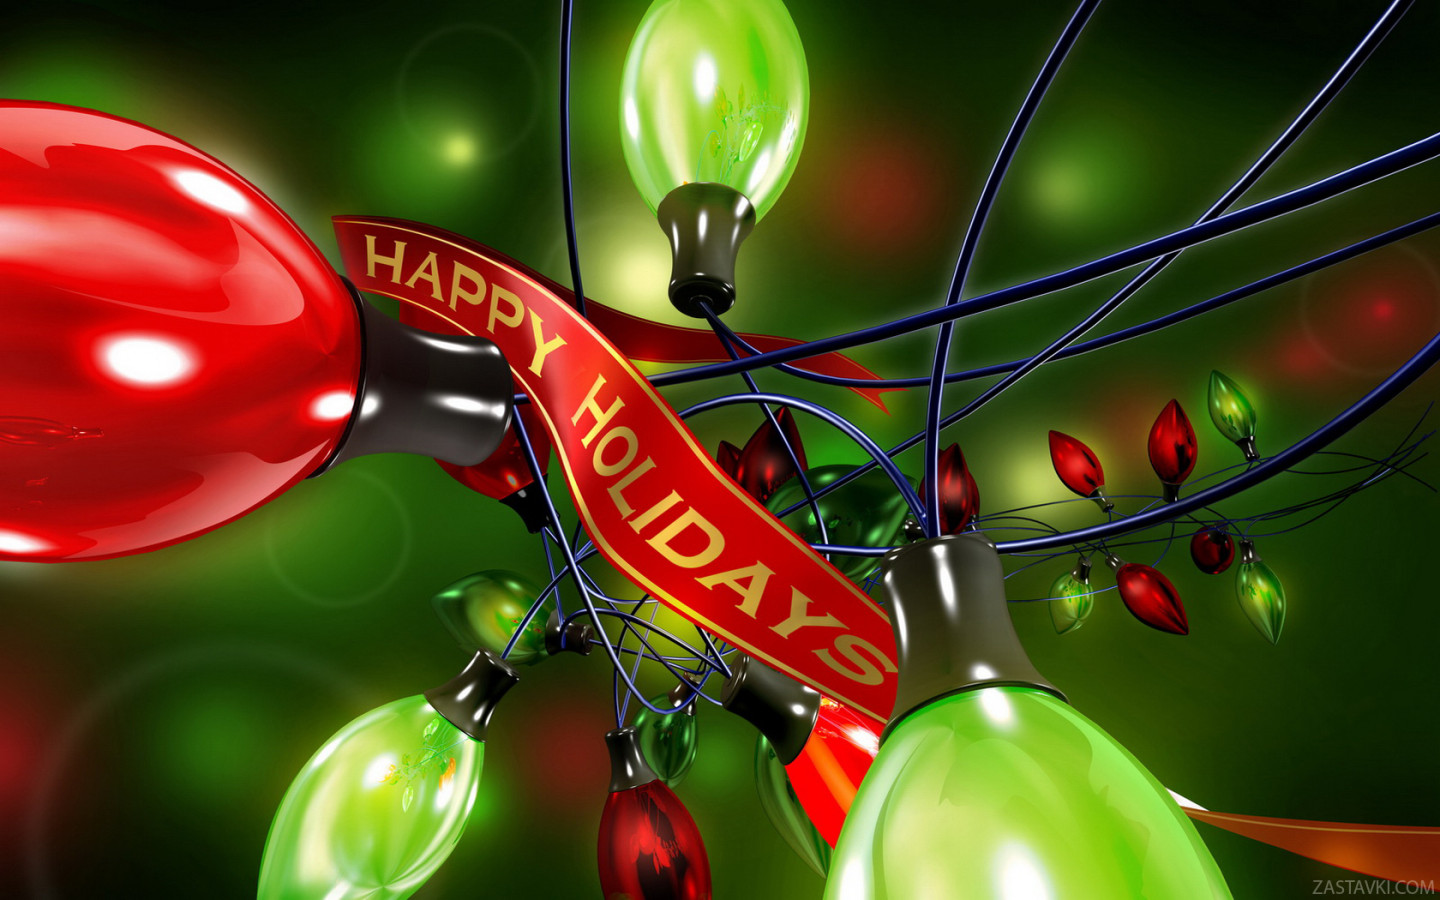 Previous, Holidays - New Year wallpapers - Christmas lights wallpaper